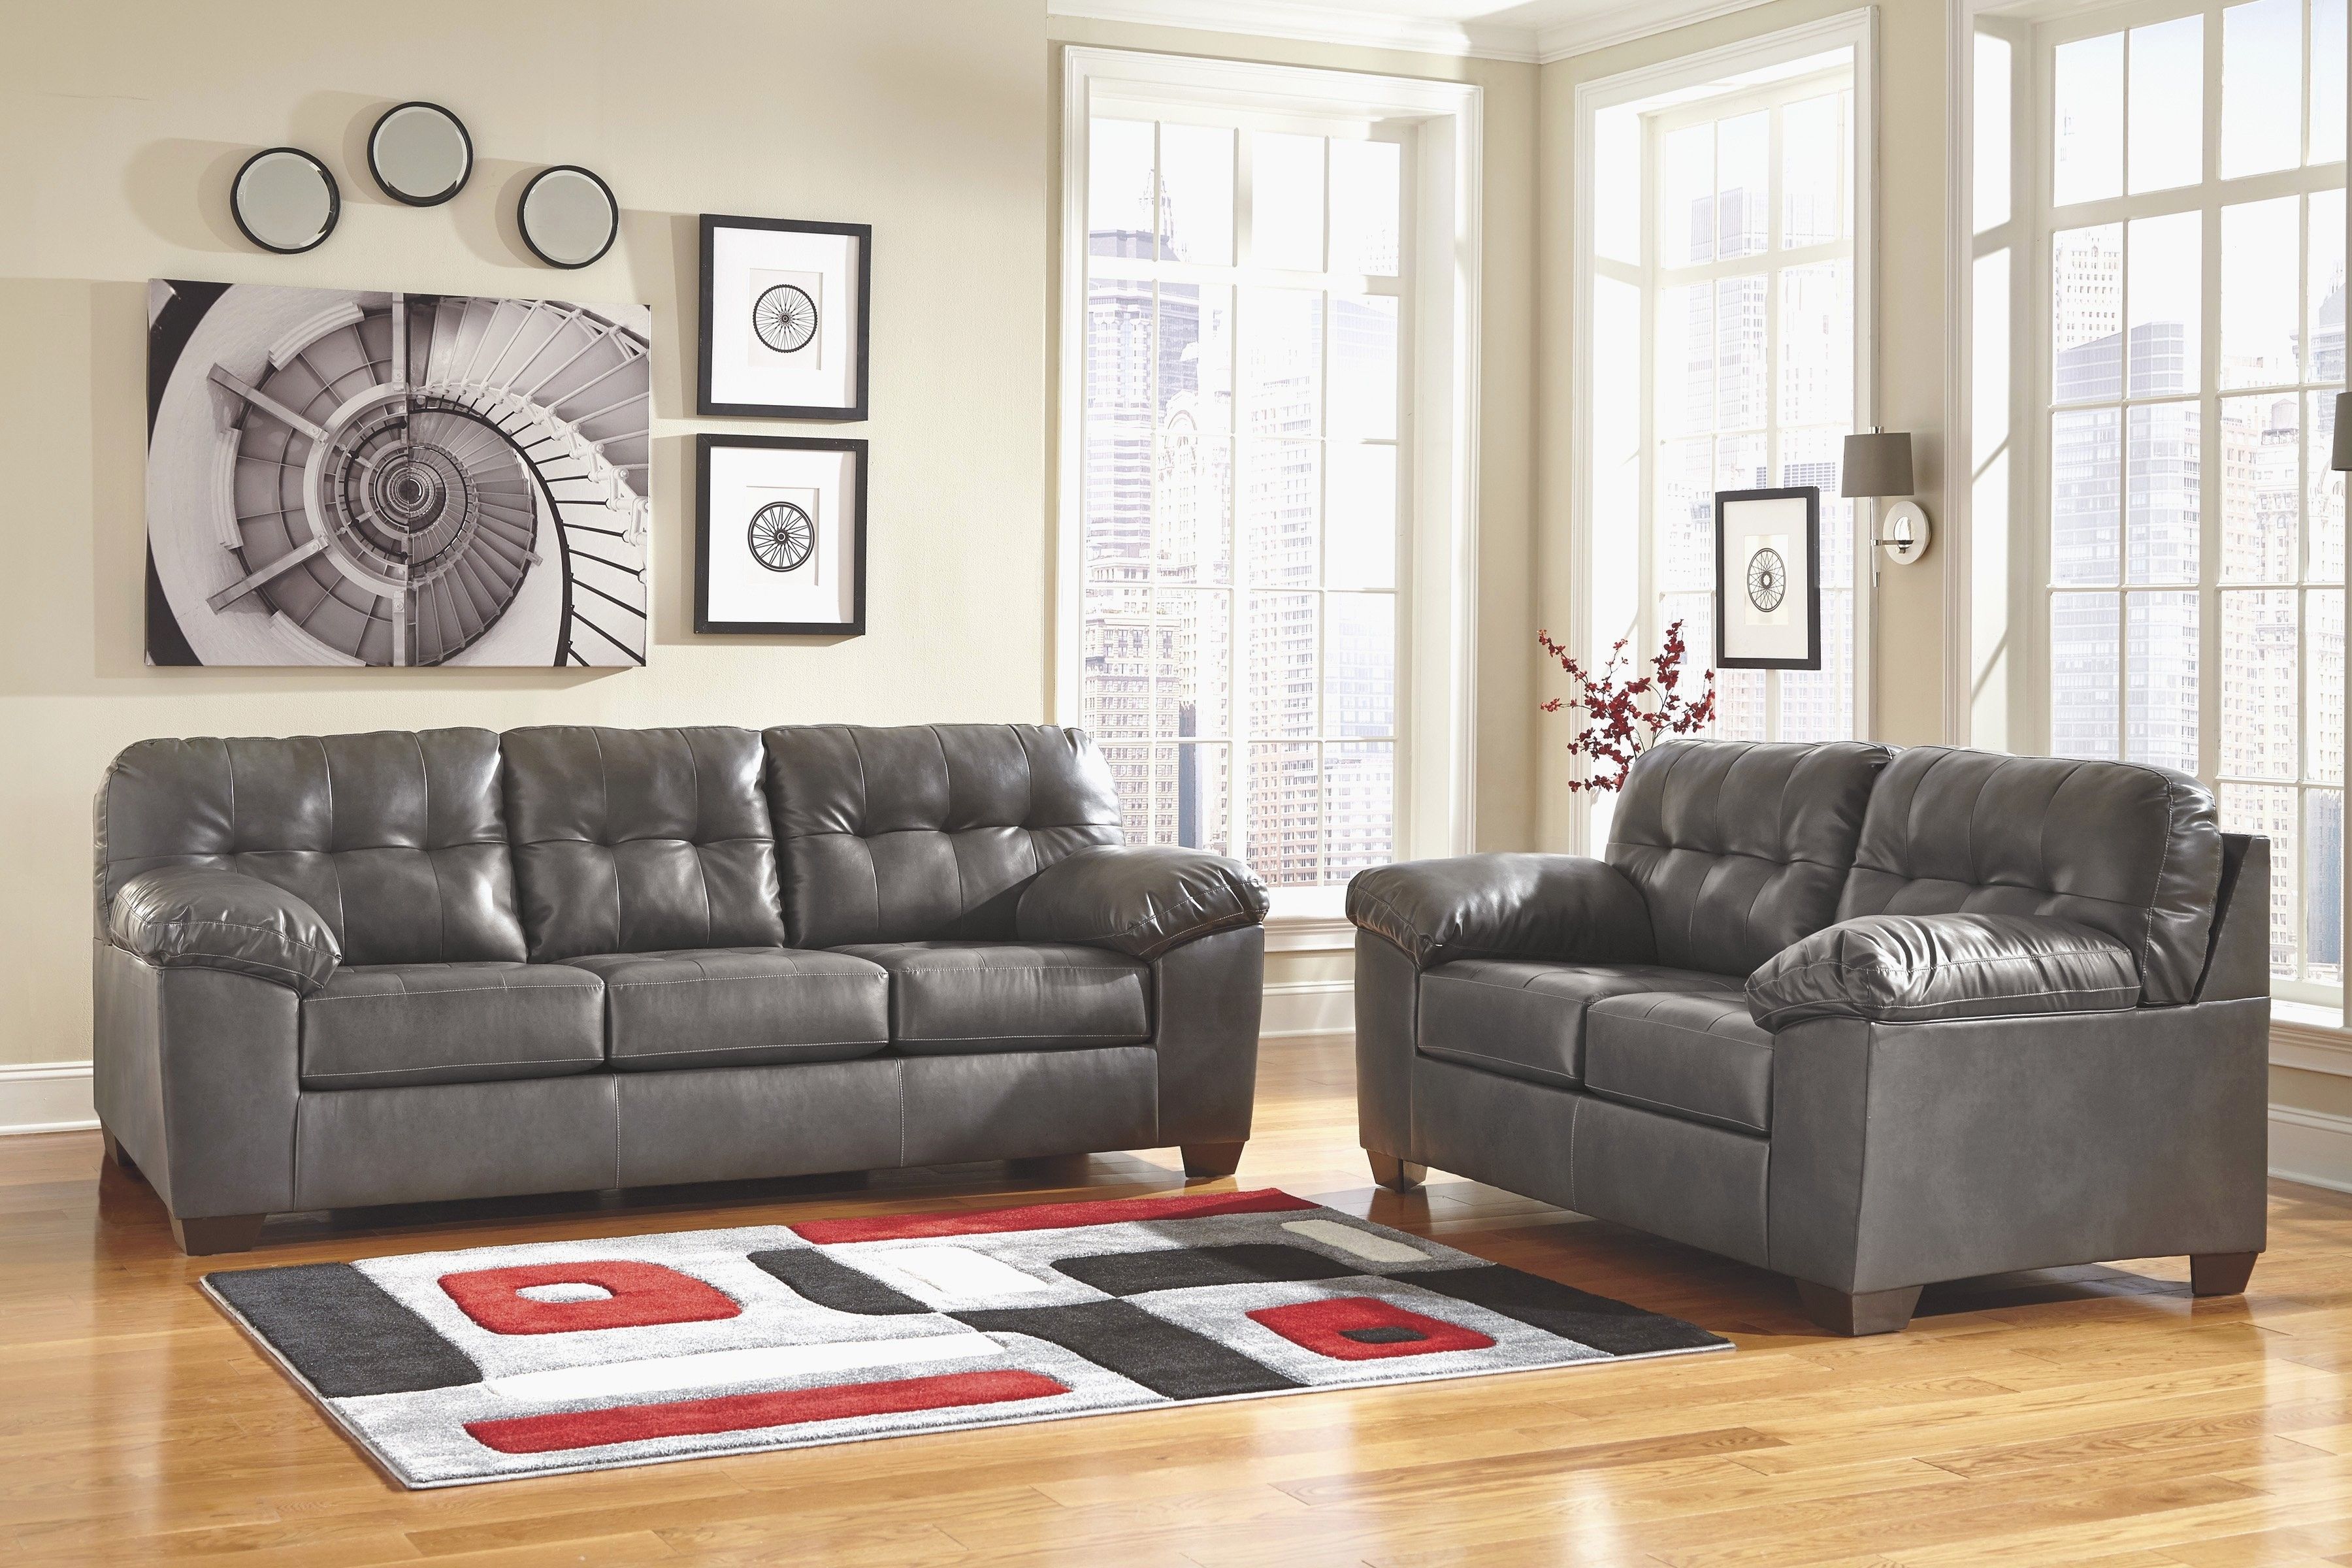 Ashley Furniture Sectional Sofas Sale Inspirational Leather With Regard To Meyer 3 Piece Sectionals With Raf Chaise (View 26 of 30)